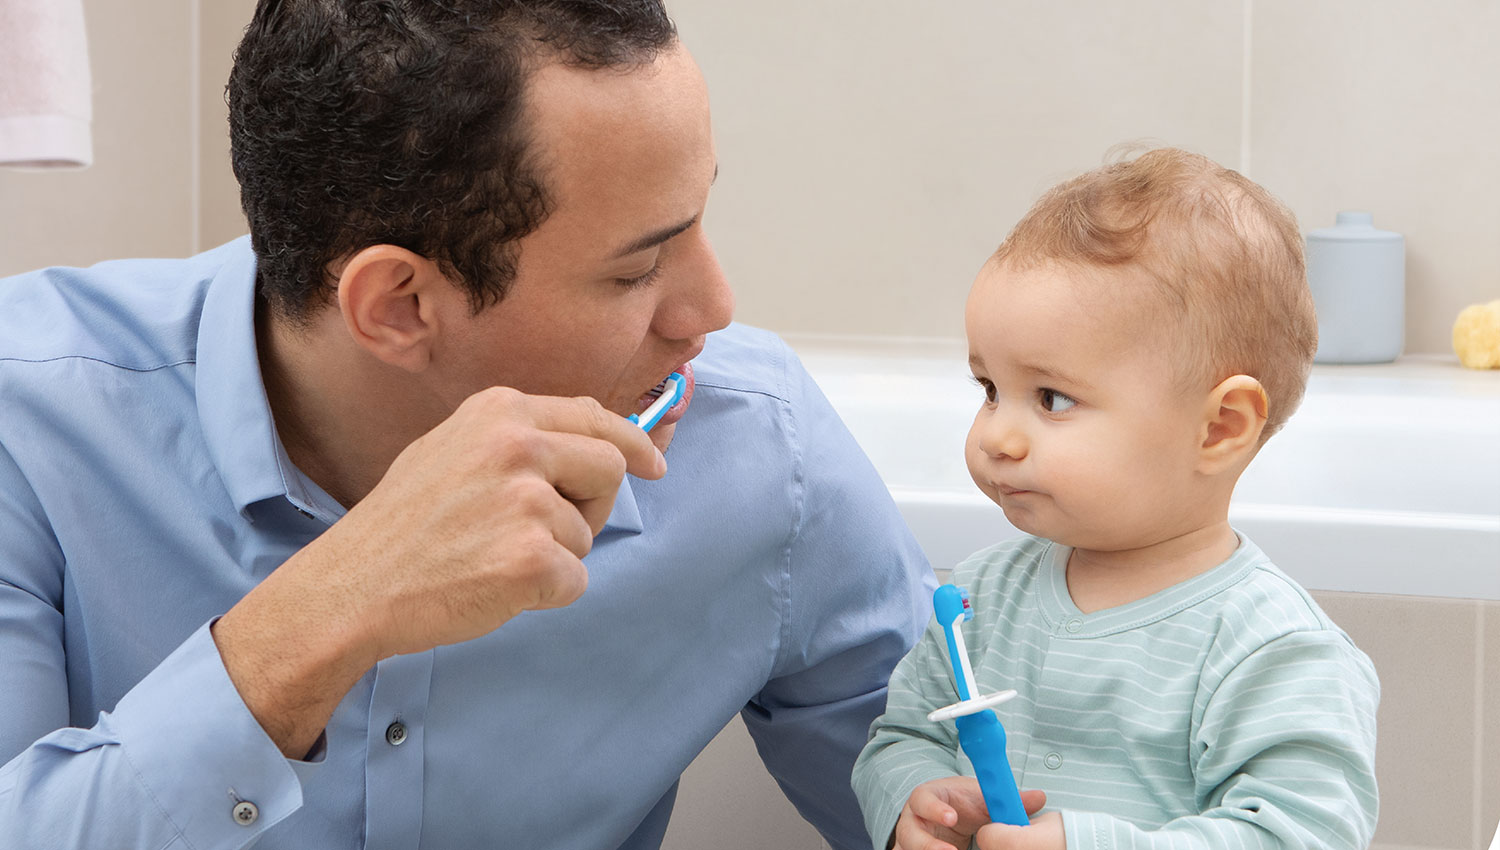 Dad brushing teeth with baby